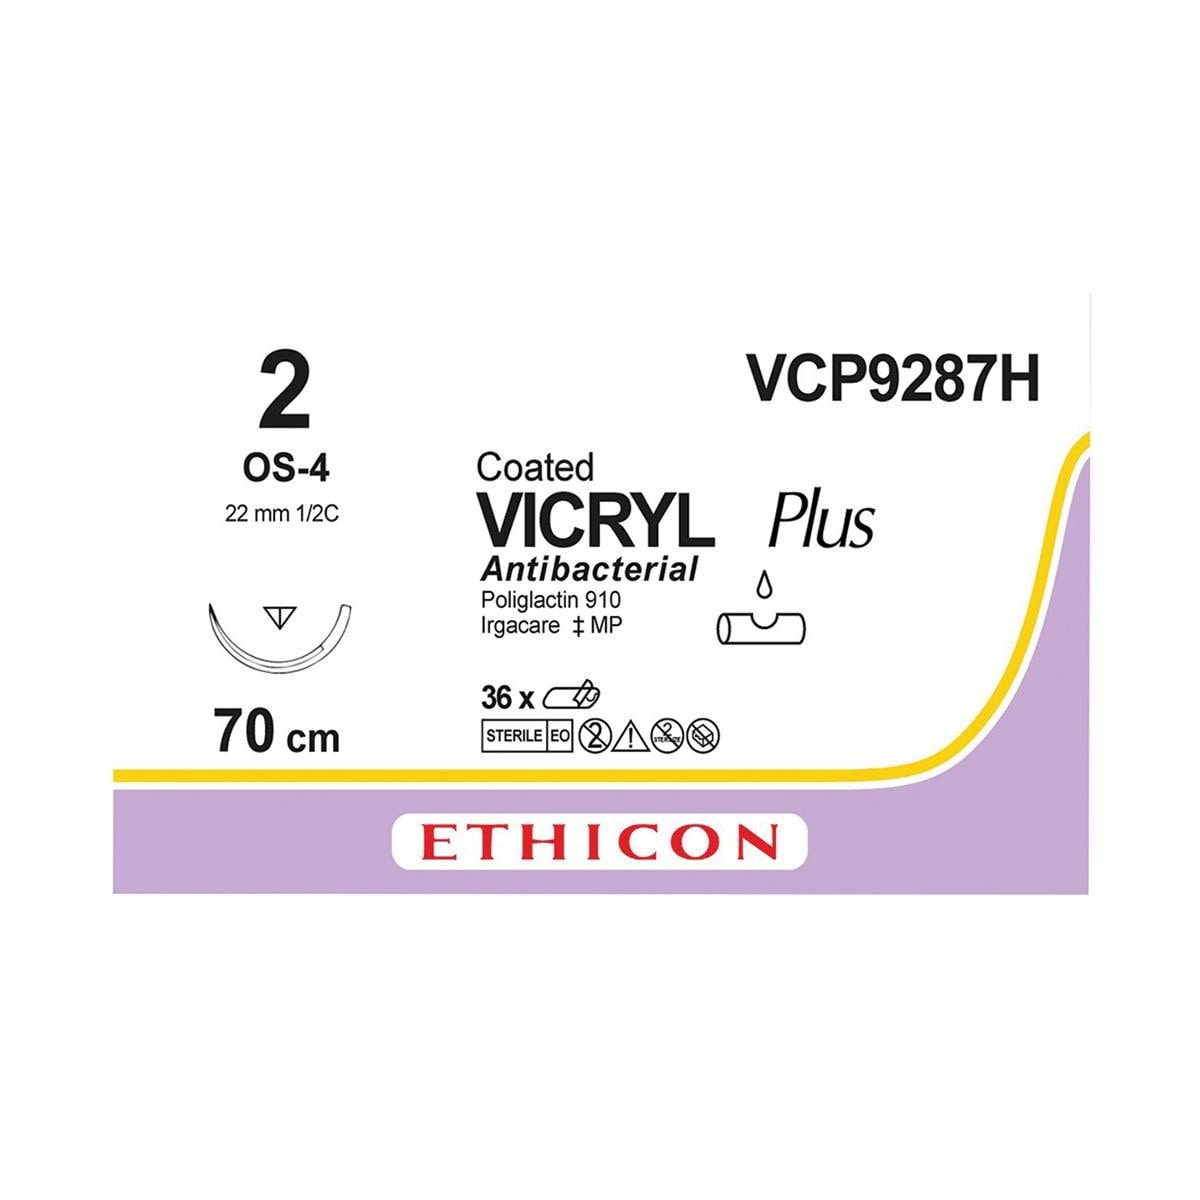 VICRYL Plus Sutures Violet Coated 70cm 2-0 1/2 Circle Reverse Cutting OS-4 22mm VCP9287H 36pk